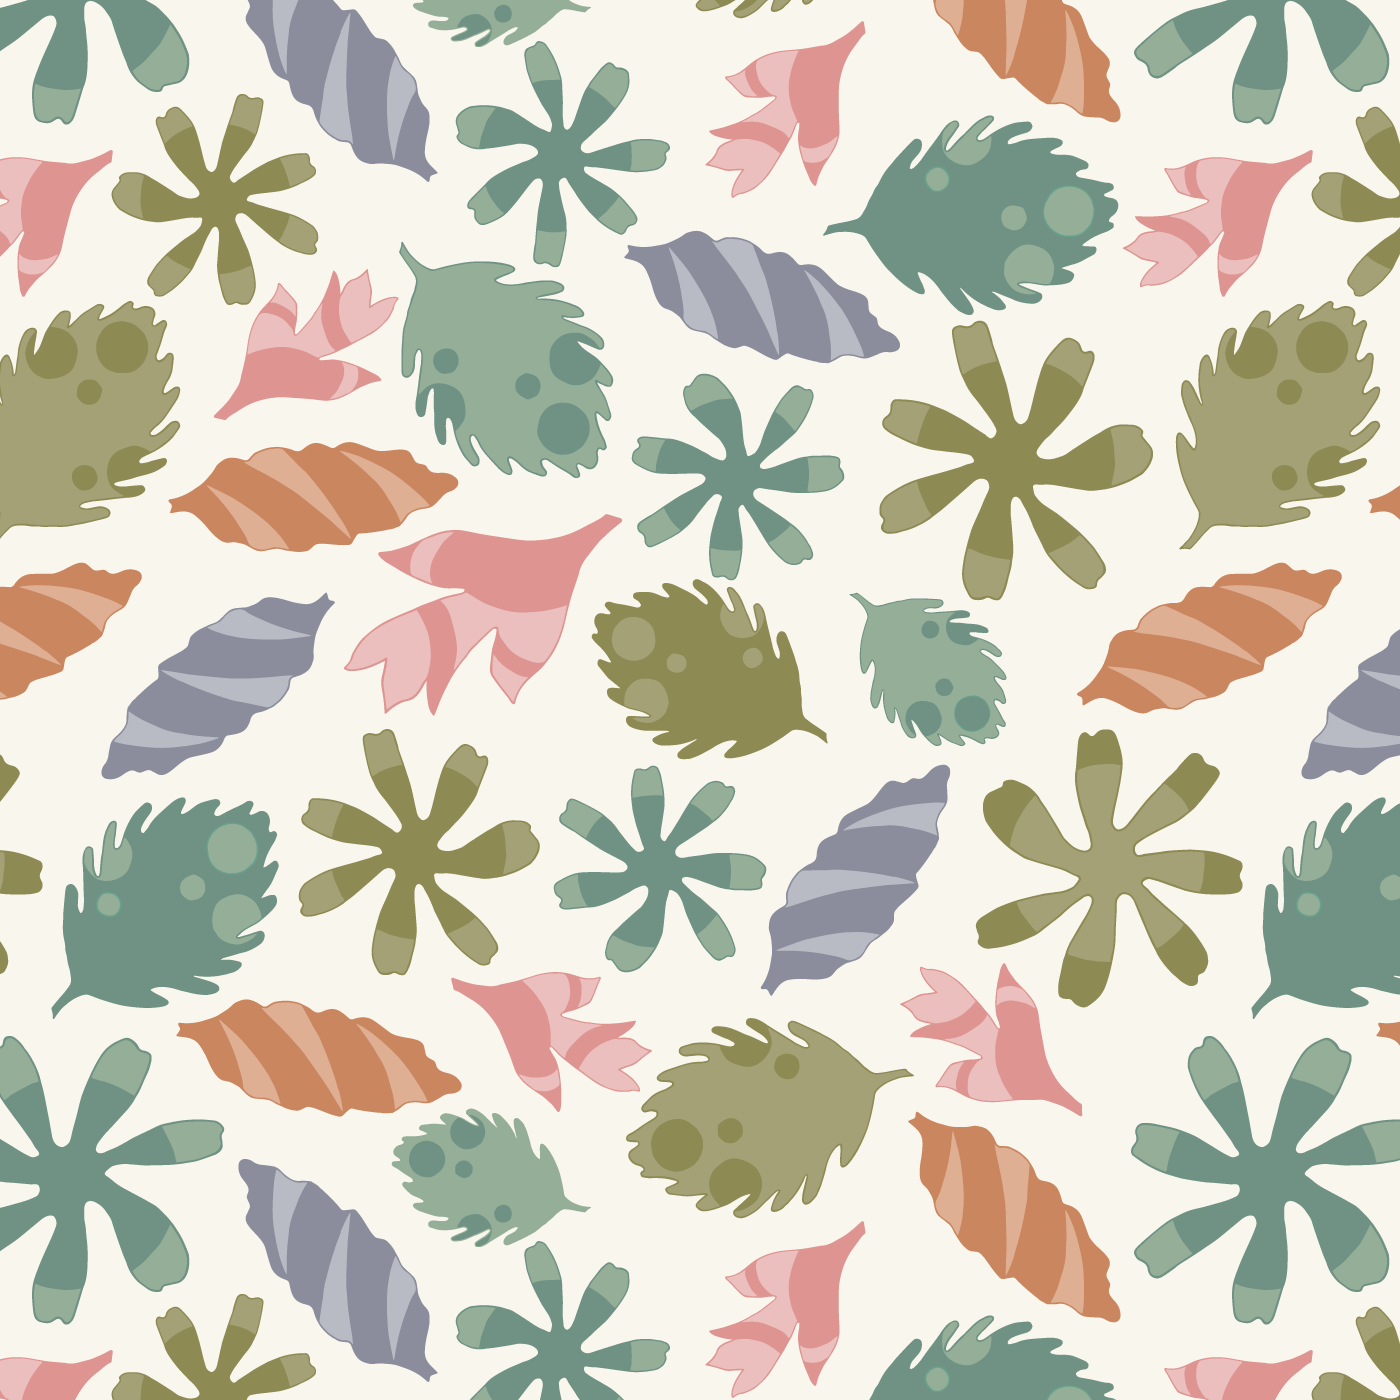 Scattered Leaves in Organic Colors